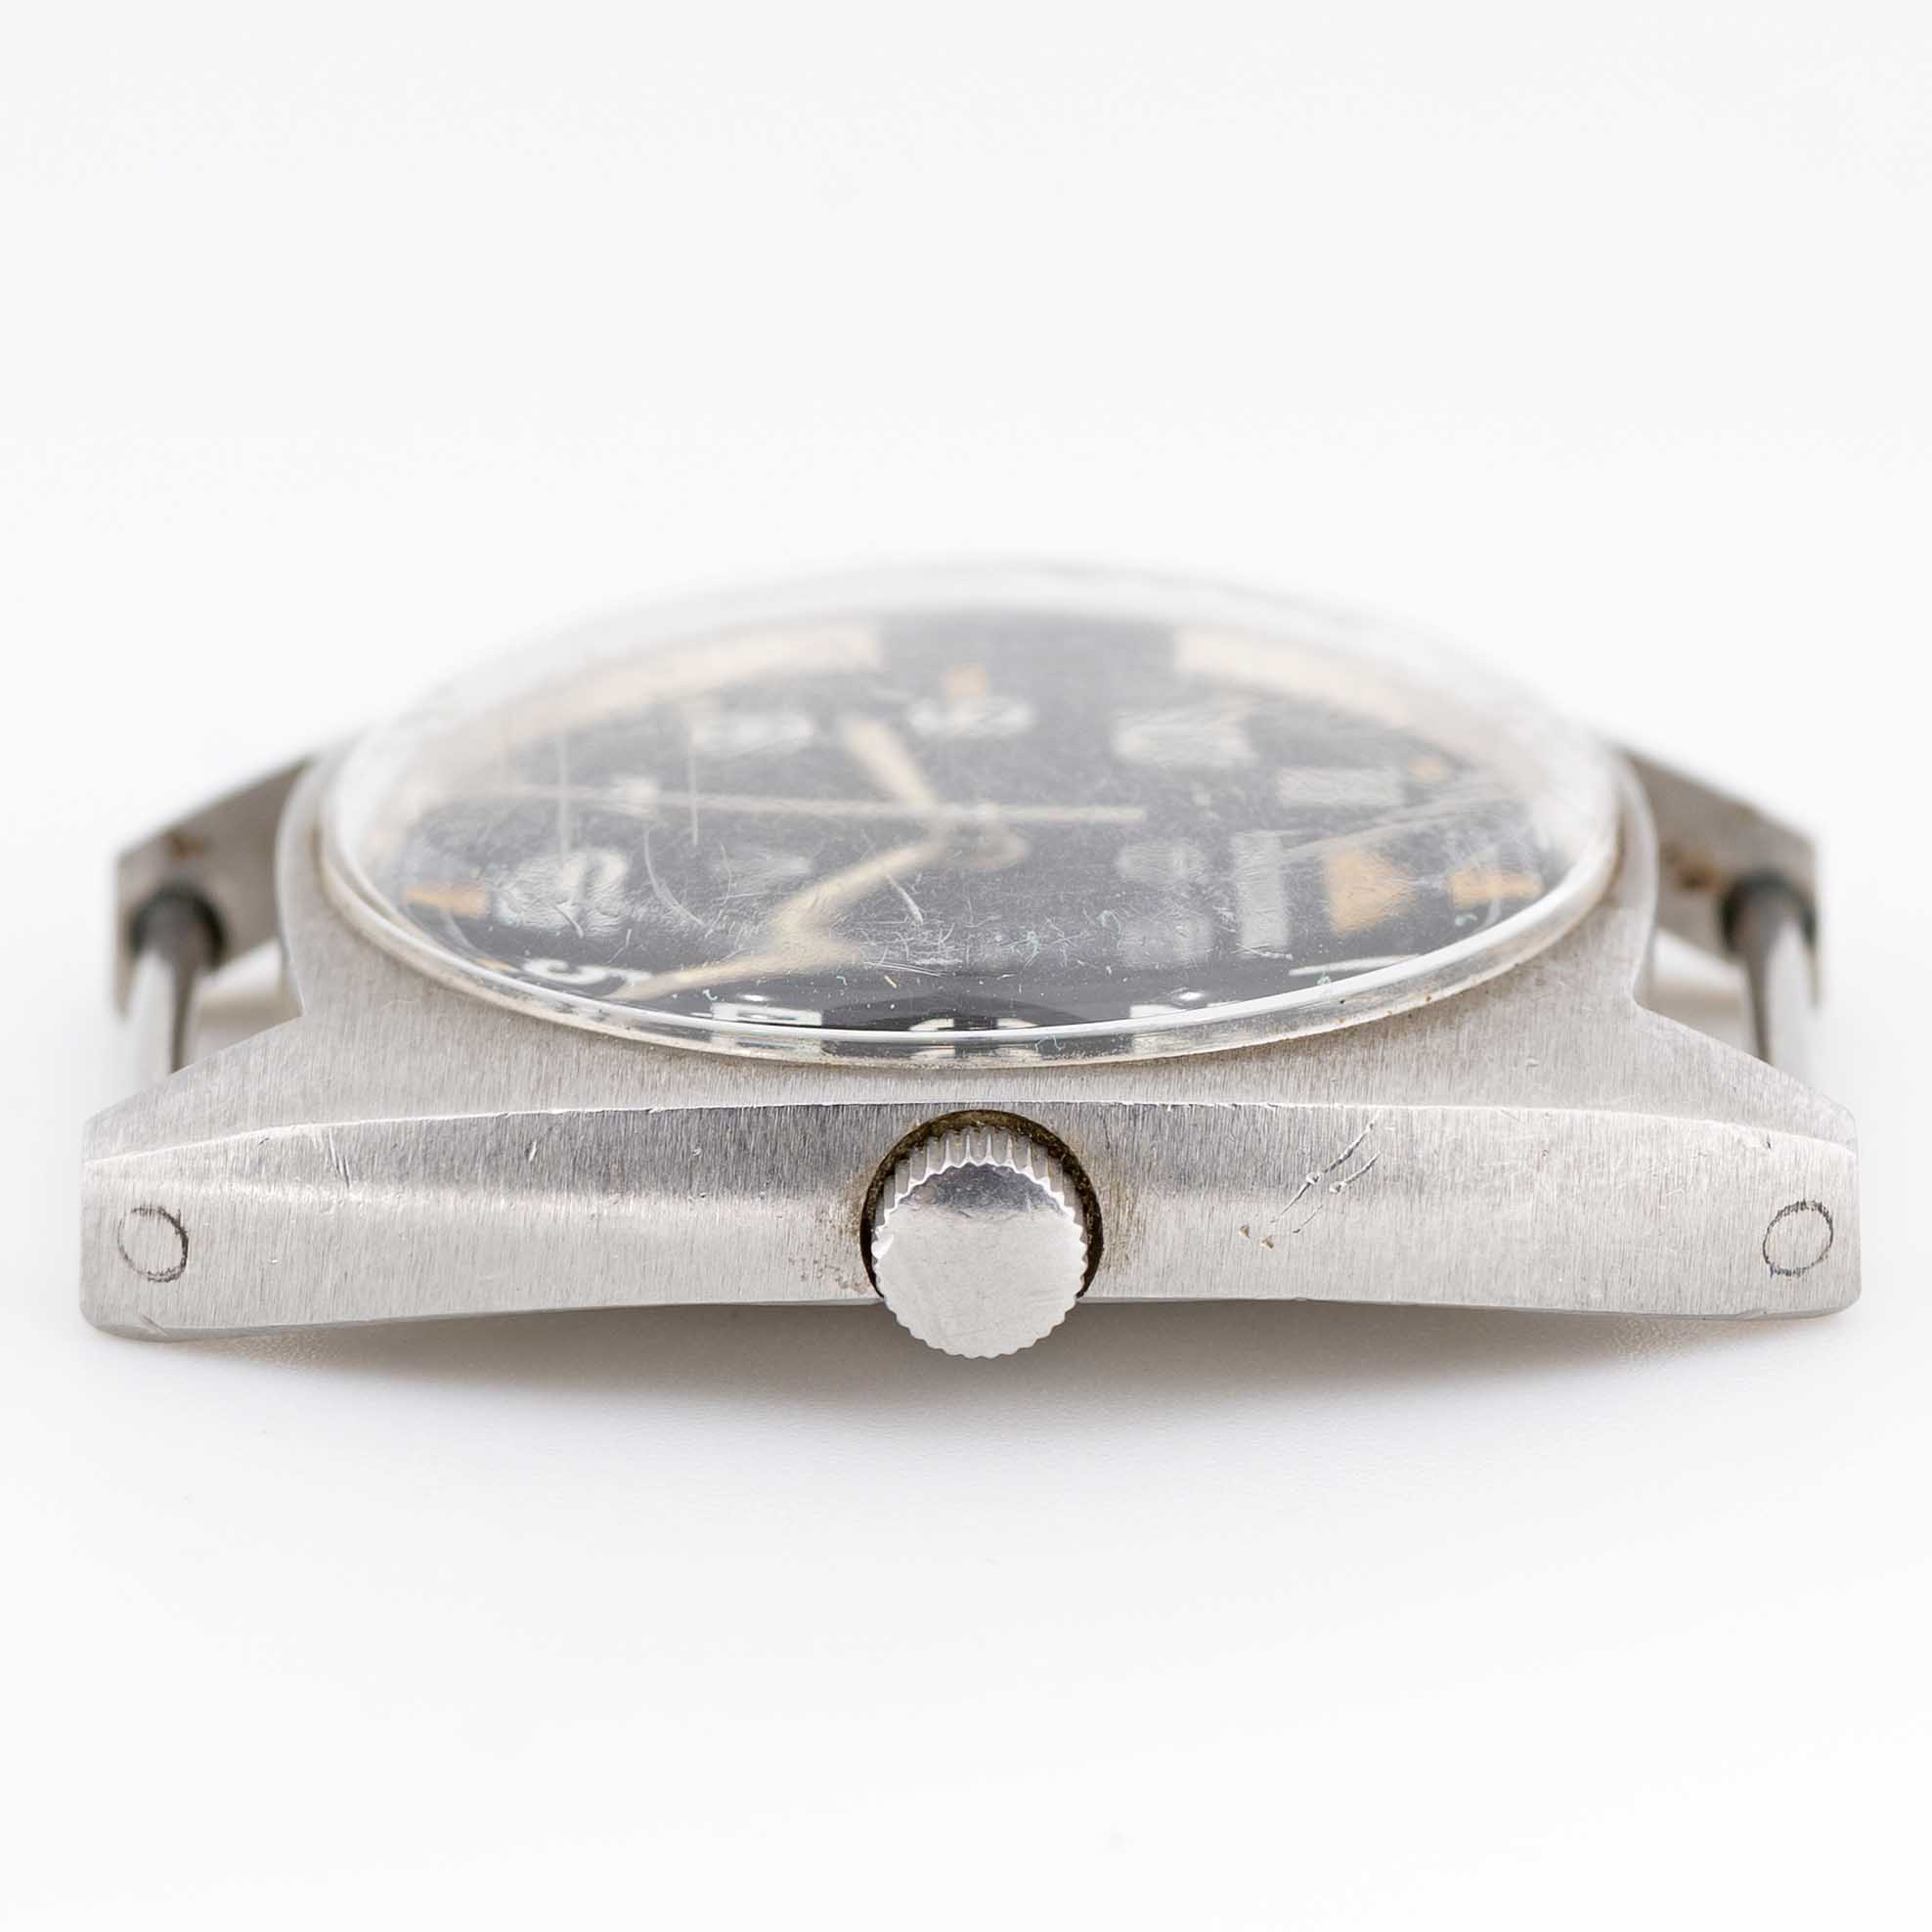 A GENTLEMAN'S STAINLESS STEEL BRITISH MILITARY CWC WRIST WATCH DATED 1977, ISSUED TO THE ARMY - Image 7 of 8